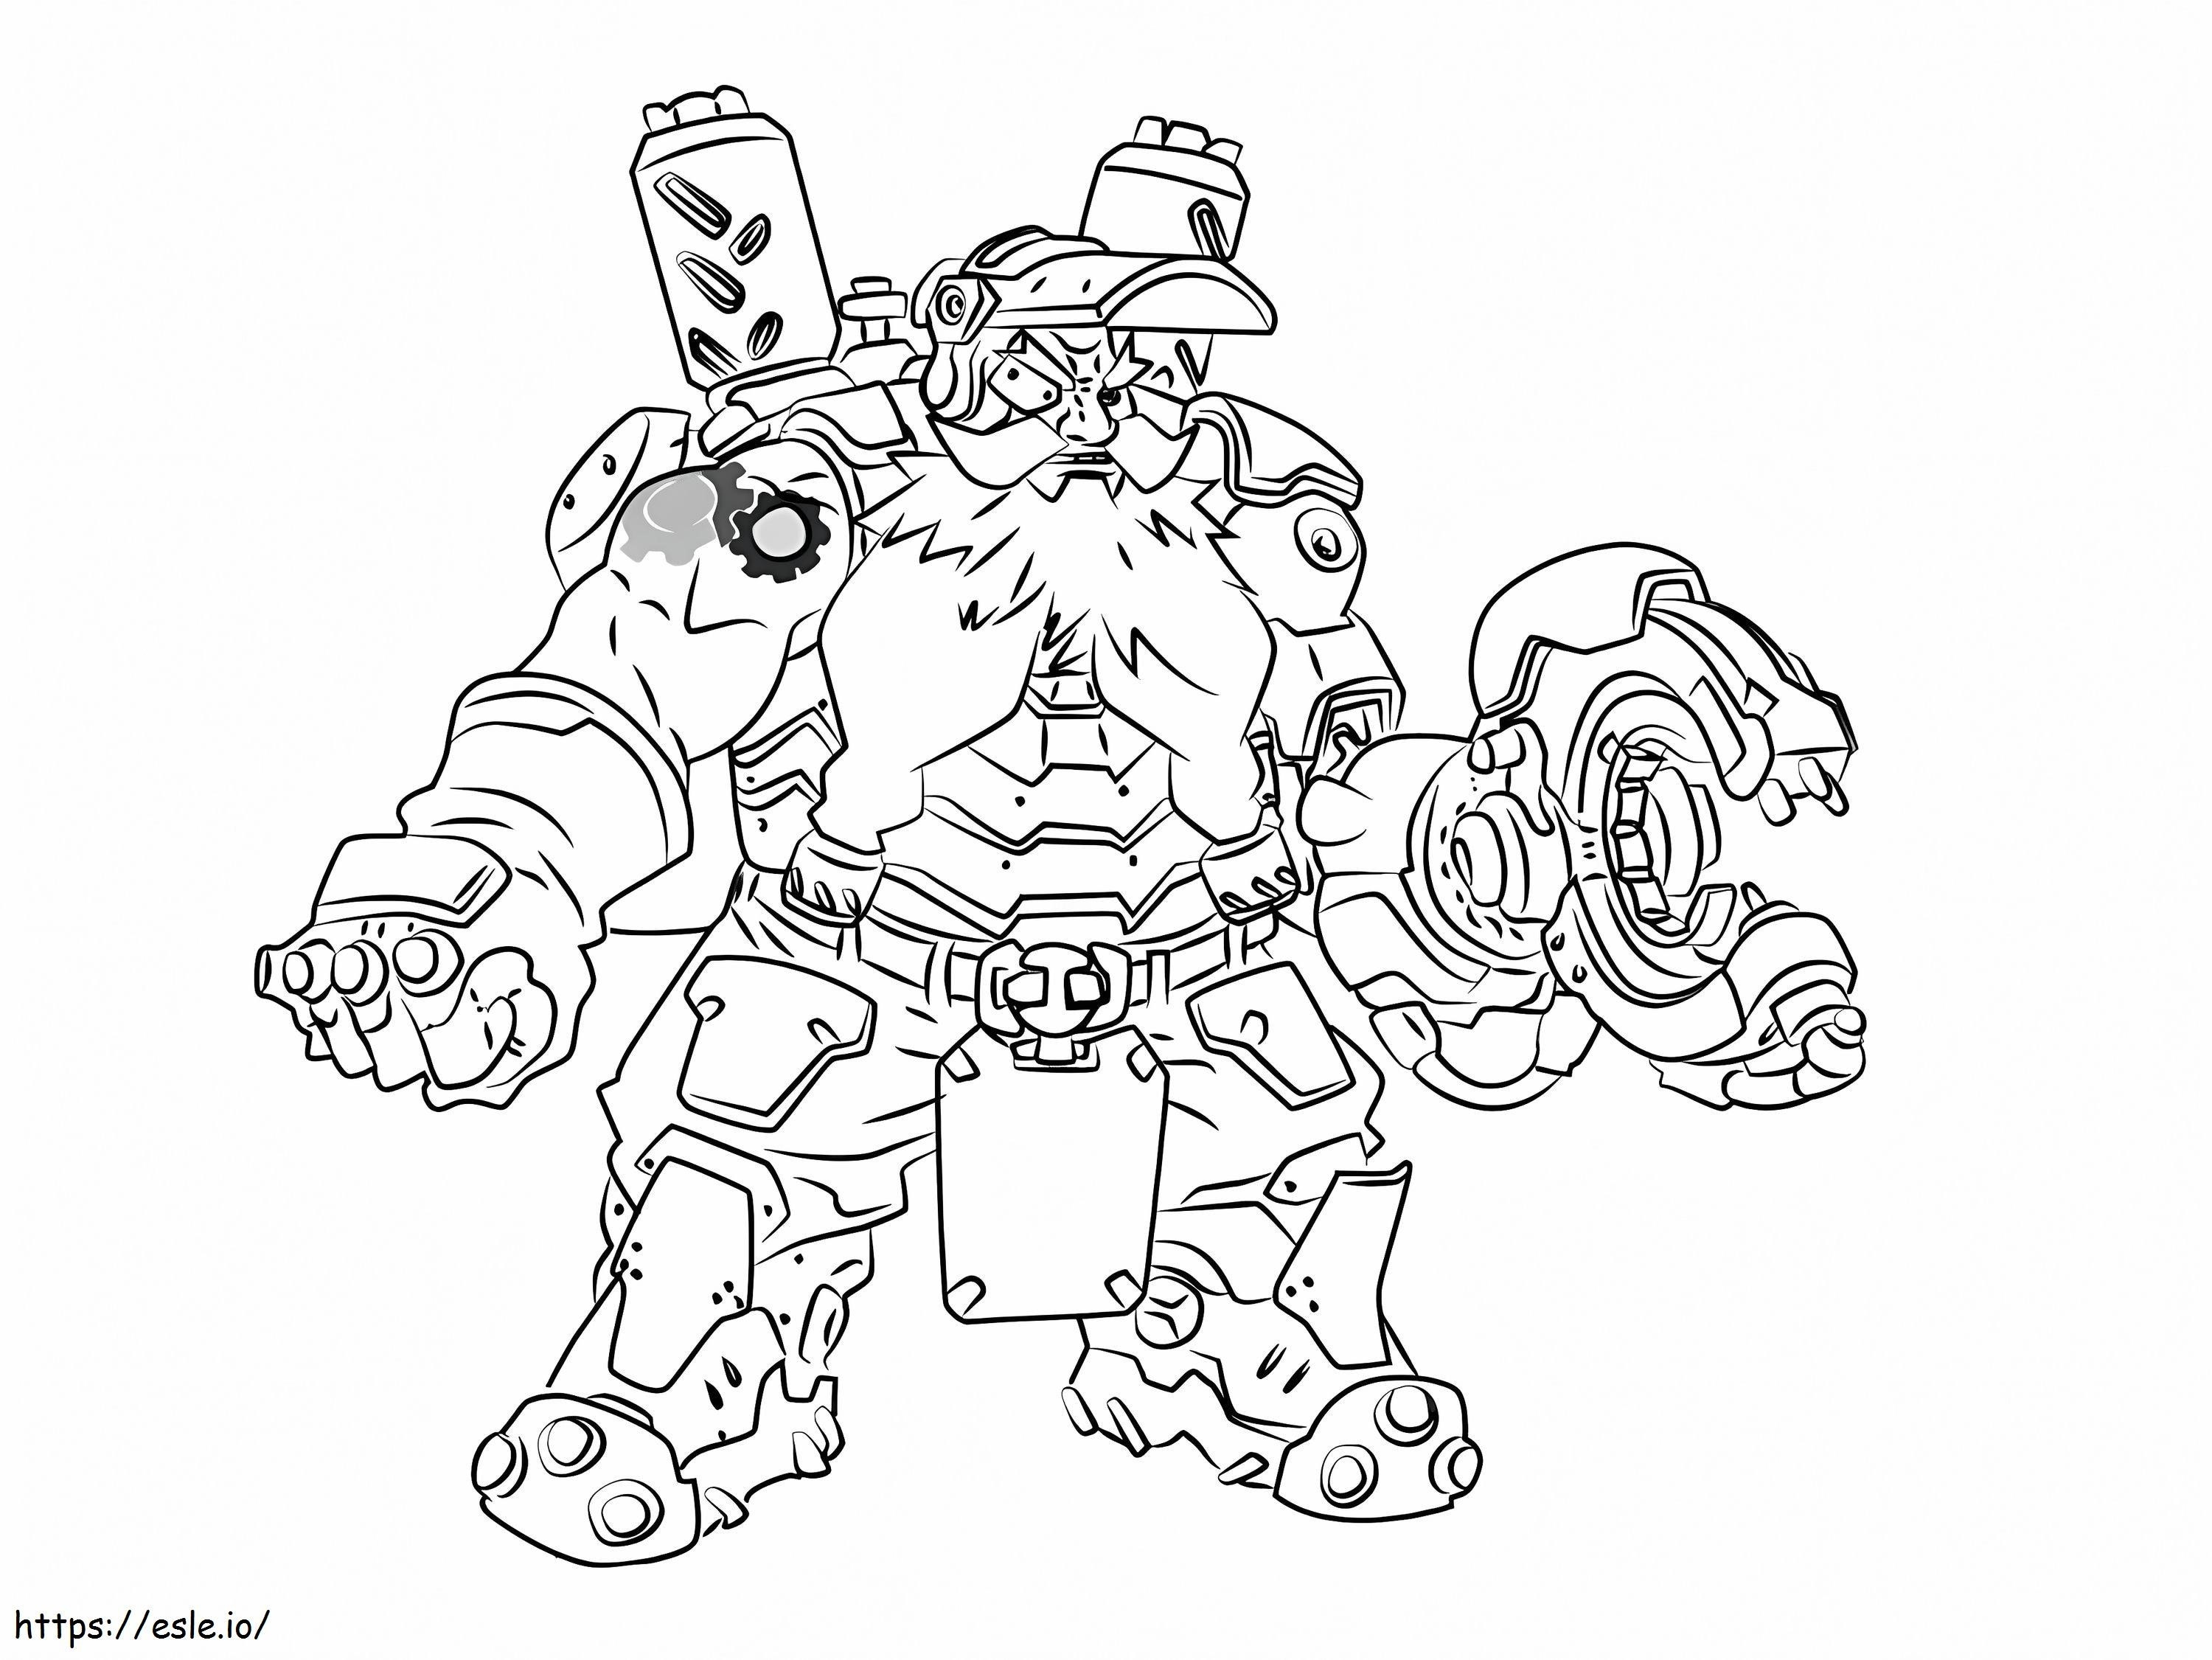 Overwatch 030 coloring page